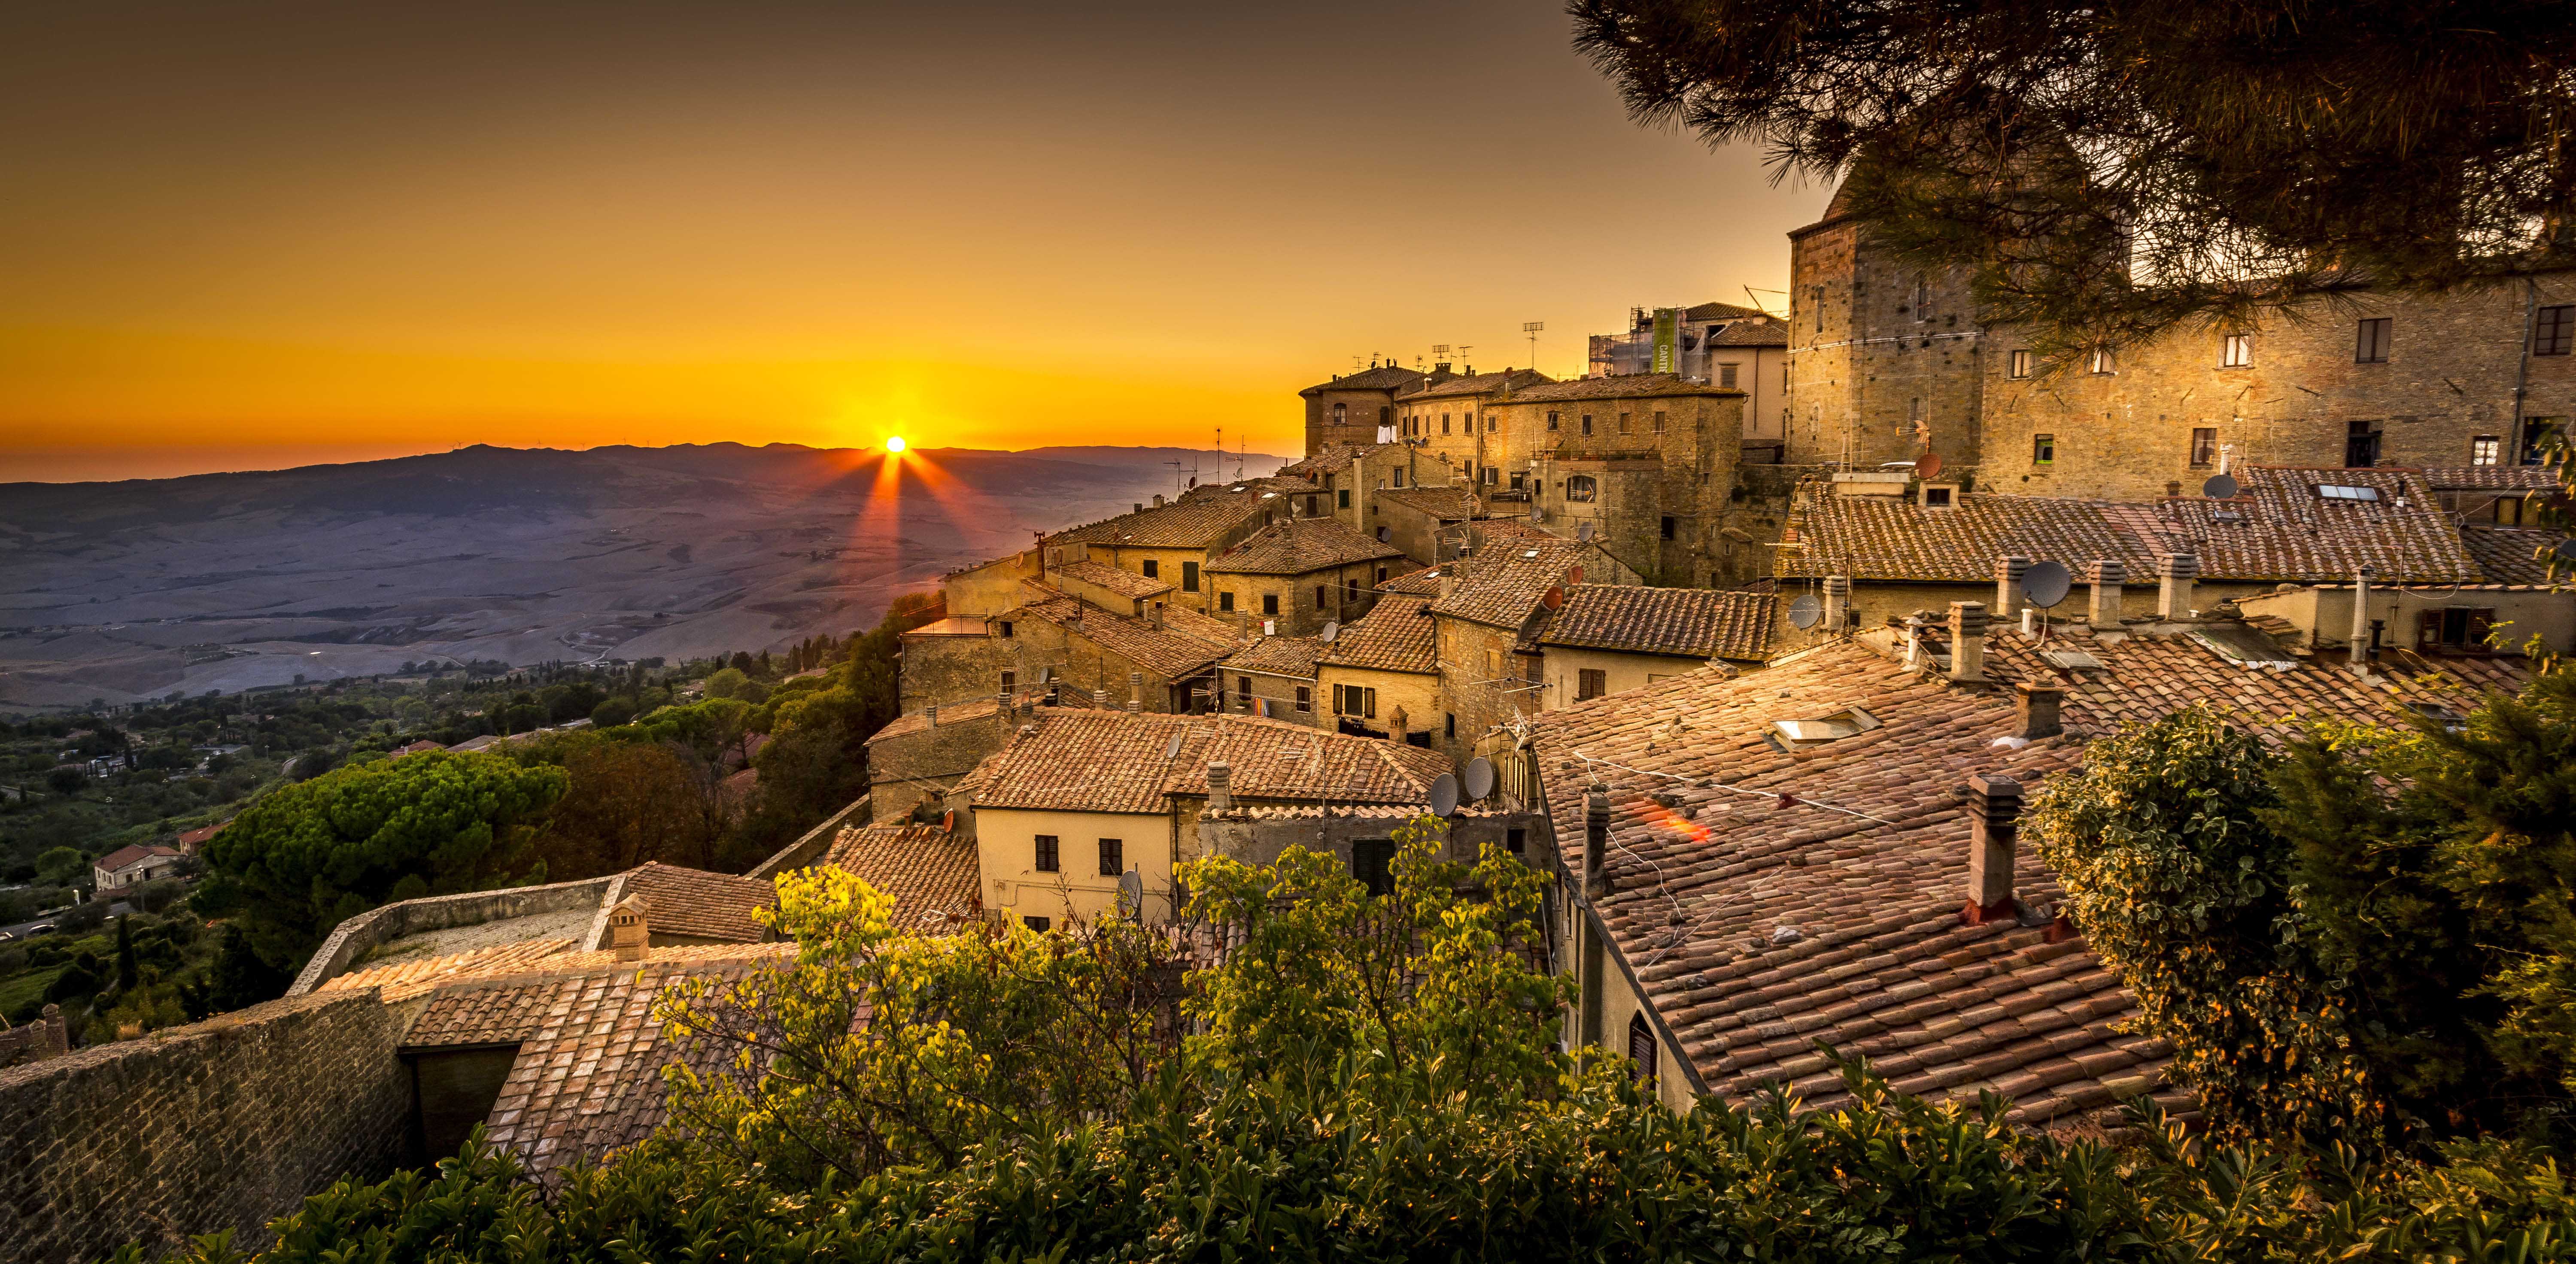 Why the imposing fortified Etruscan town of Volterra in Tuscany should be on every culture-vulture's 'to go' list